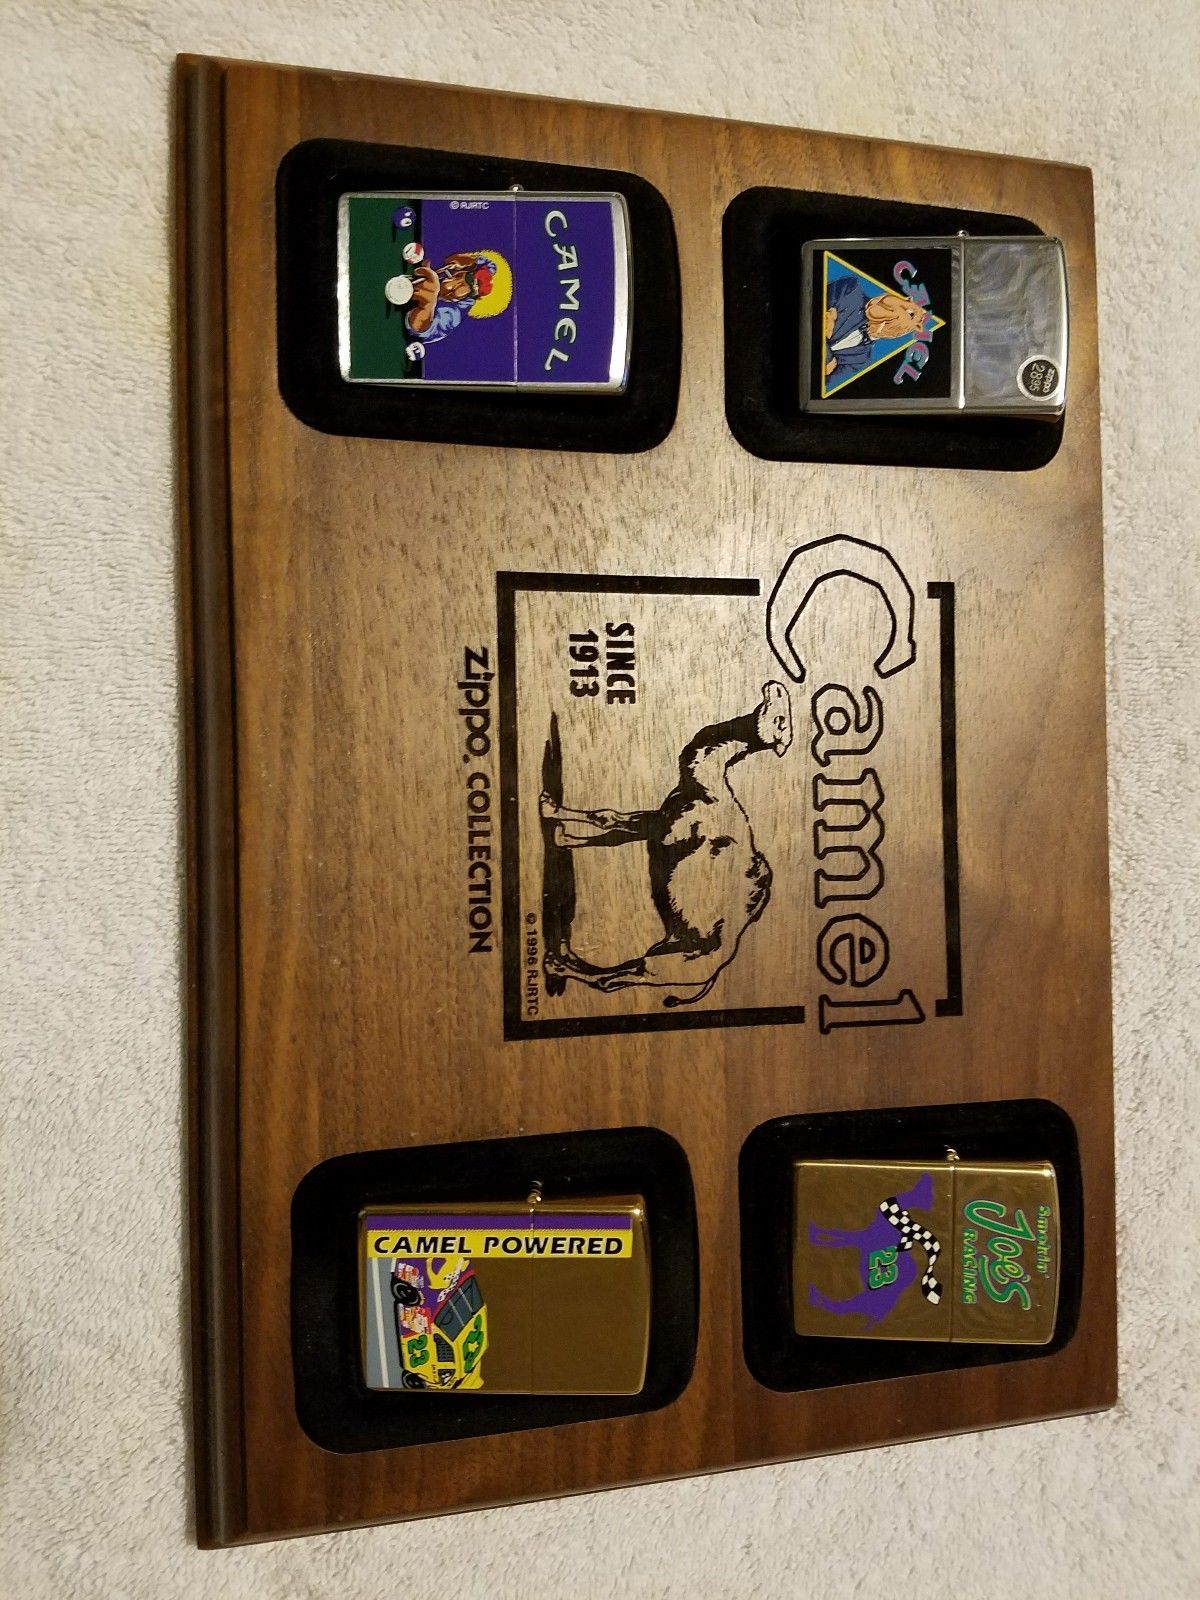 4 Vintage Joe Camel Zippo Lighters In Wood Display Plaque Wishes And Horses And Other Things Too